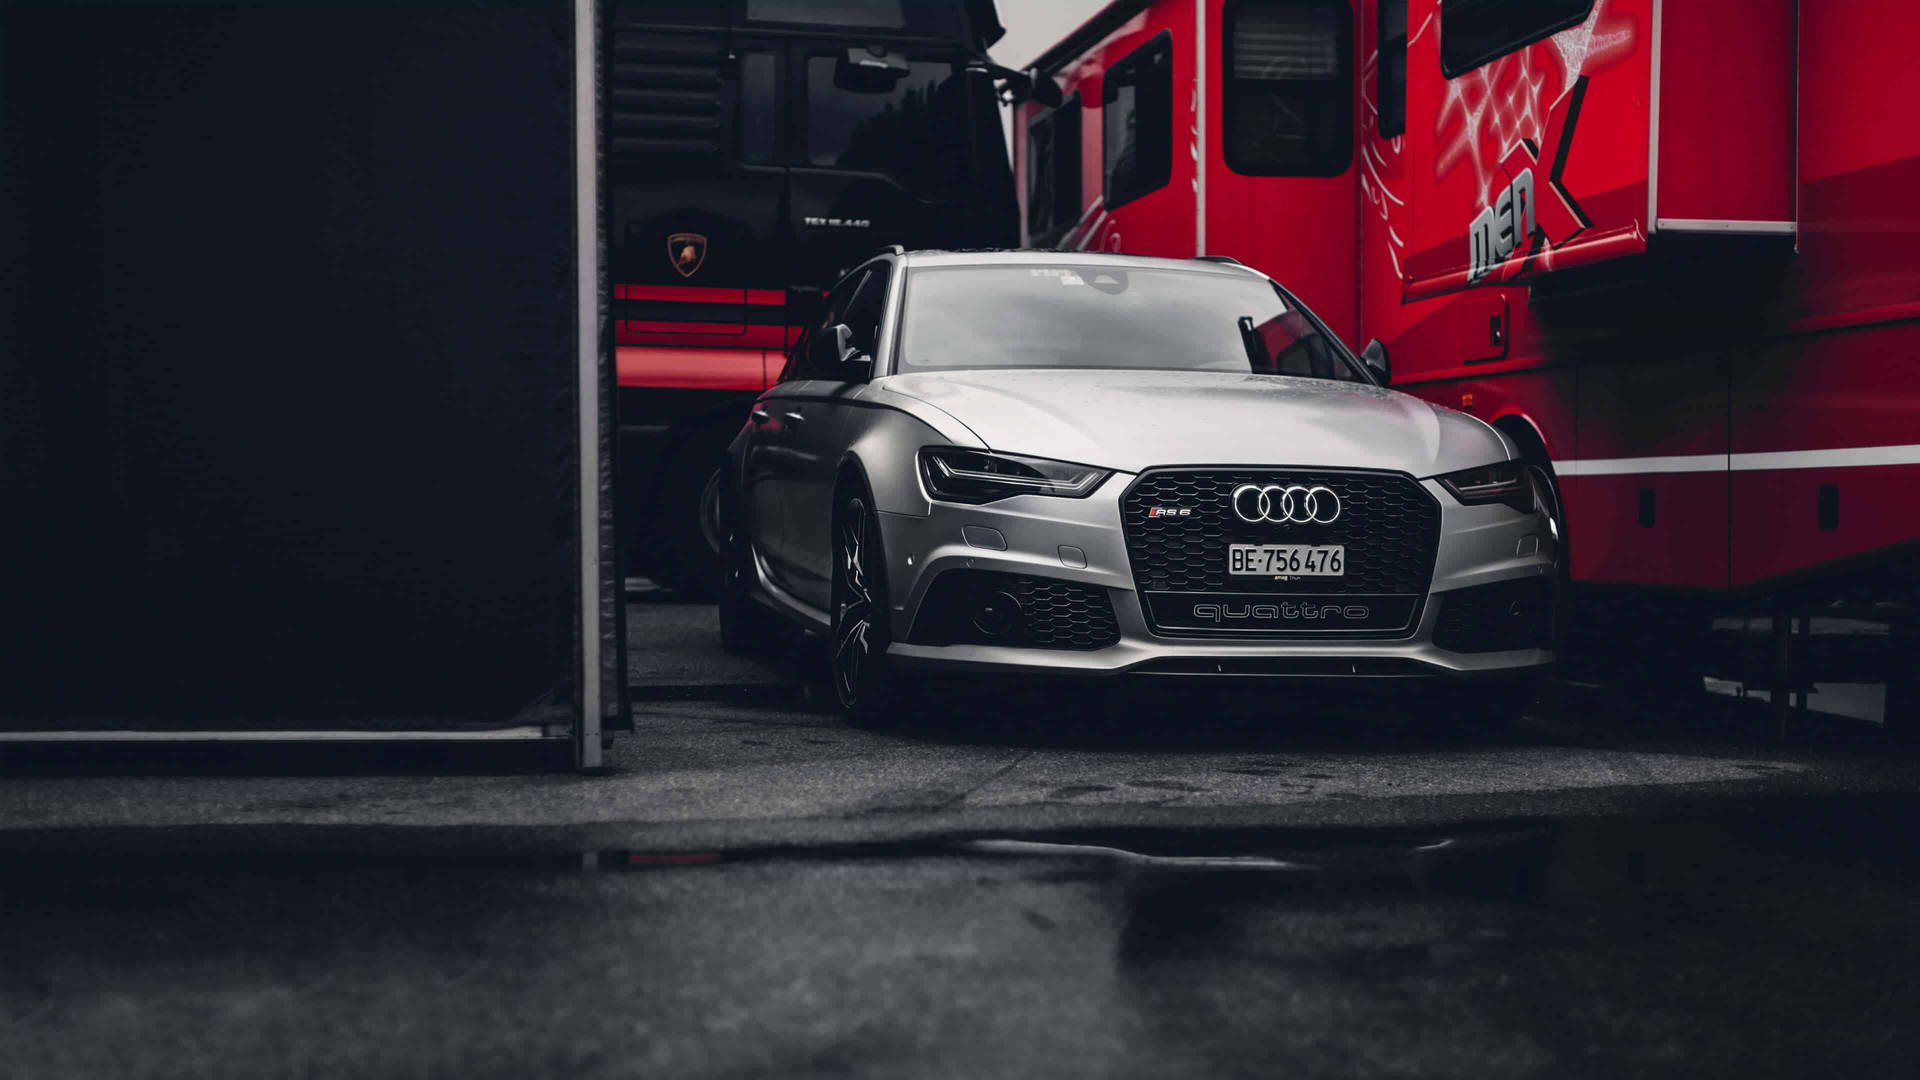 Caption: Stunning Silver Audi Rs 6 Unleashed Background